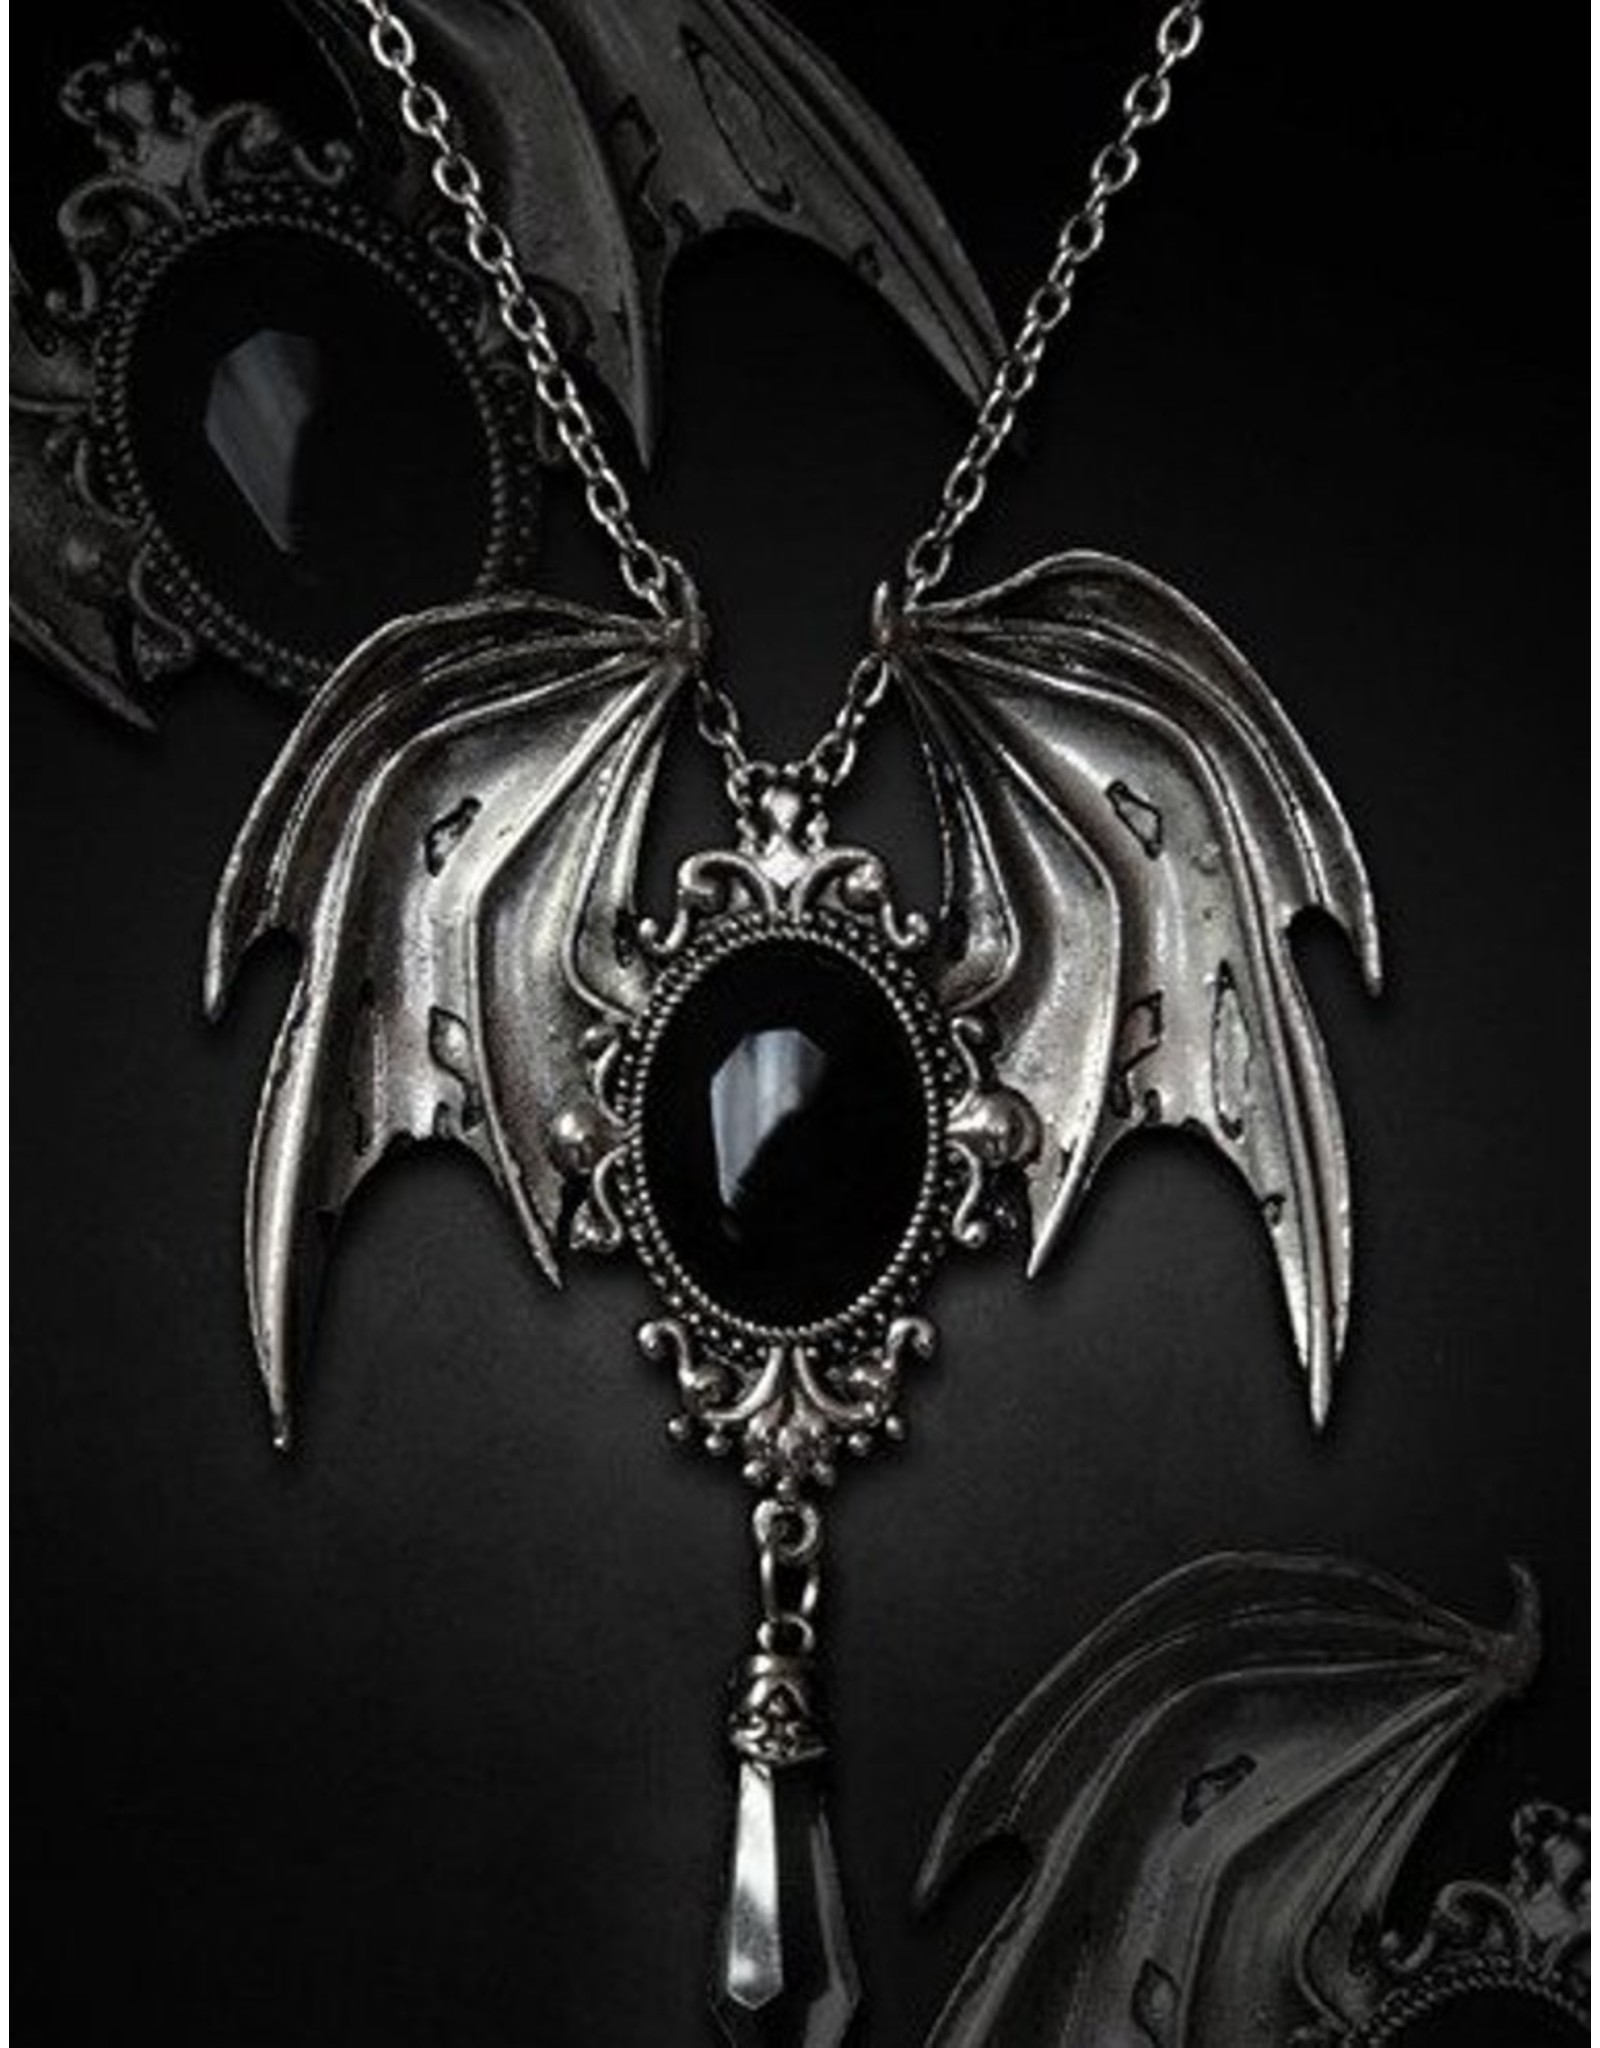 Buy OOMPHelicious Jewellery Black Gothic Goat Skull Biker Pendant Necklace  for Men & Boys at Amazon.in